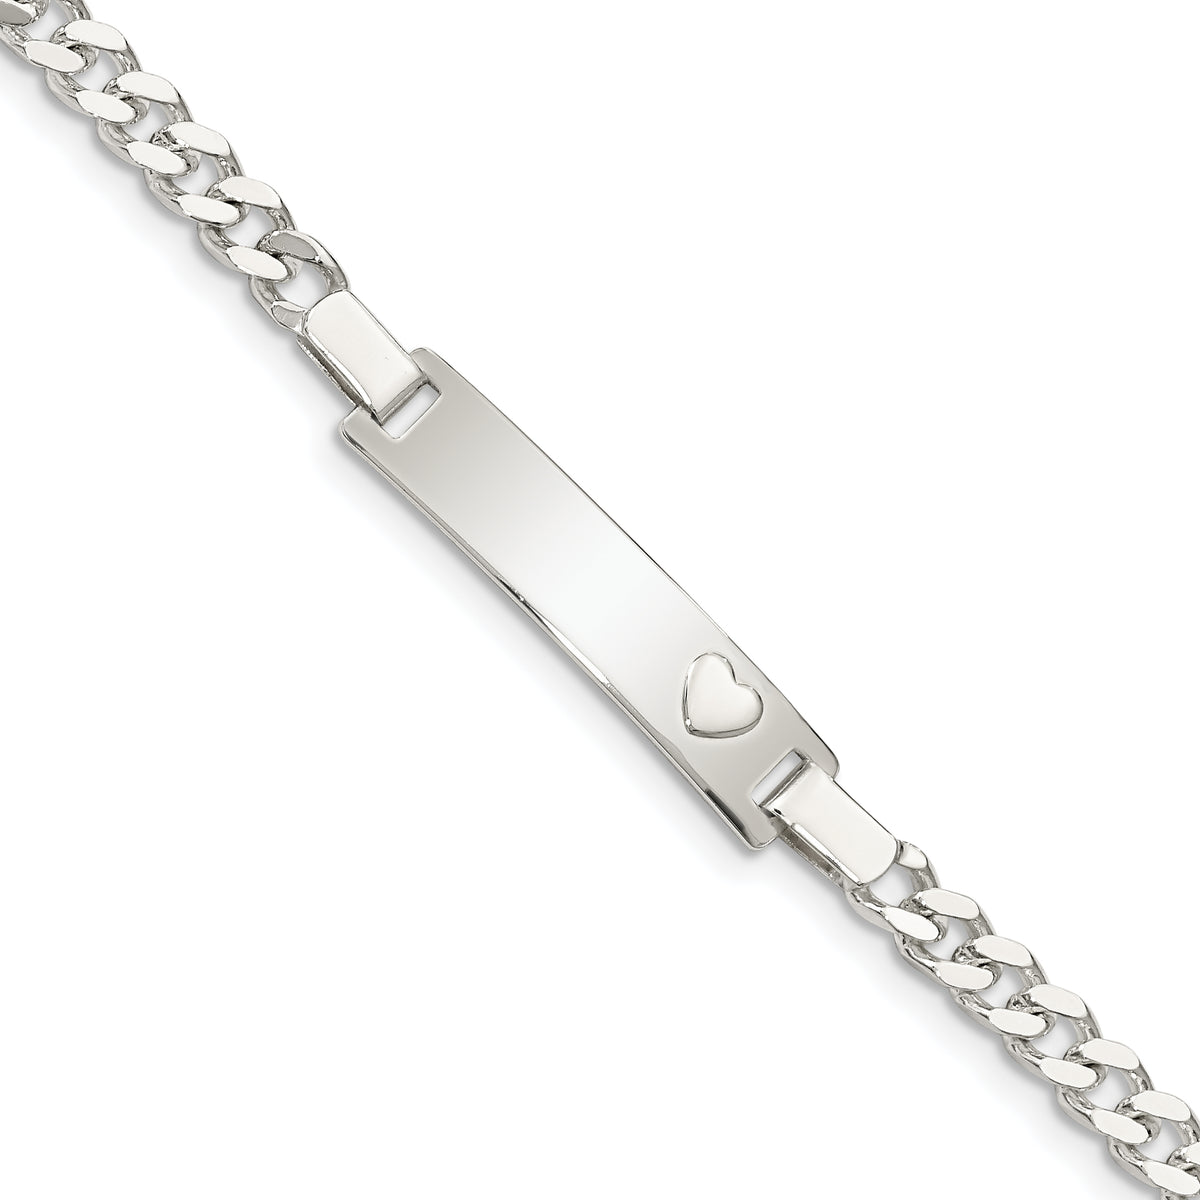 Sterling Silver Children's Heart ID Bracelet 6 inches 6mm in width FREE ENGRAVING ( Up to 8 Characters) w/ Lobster Clasp